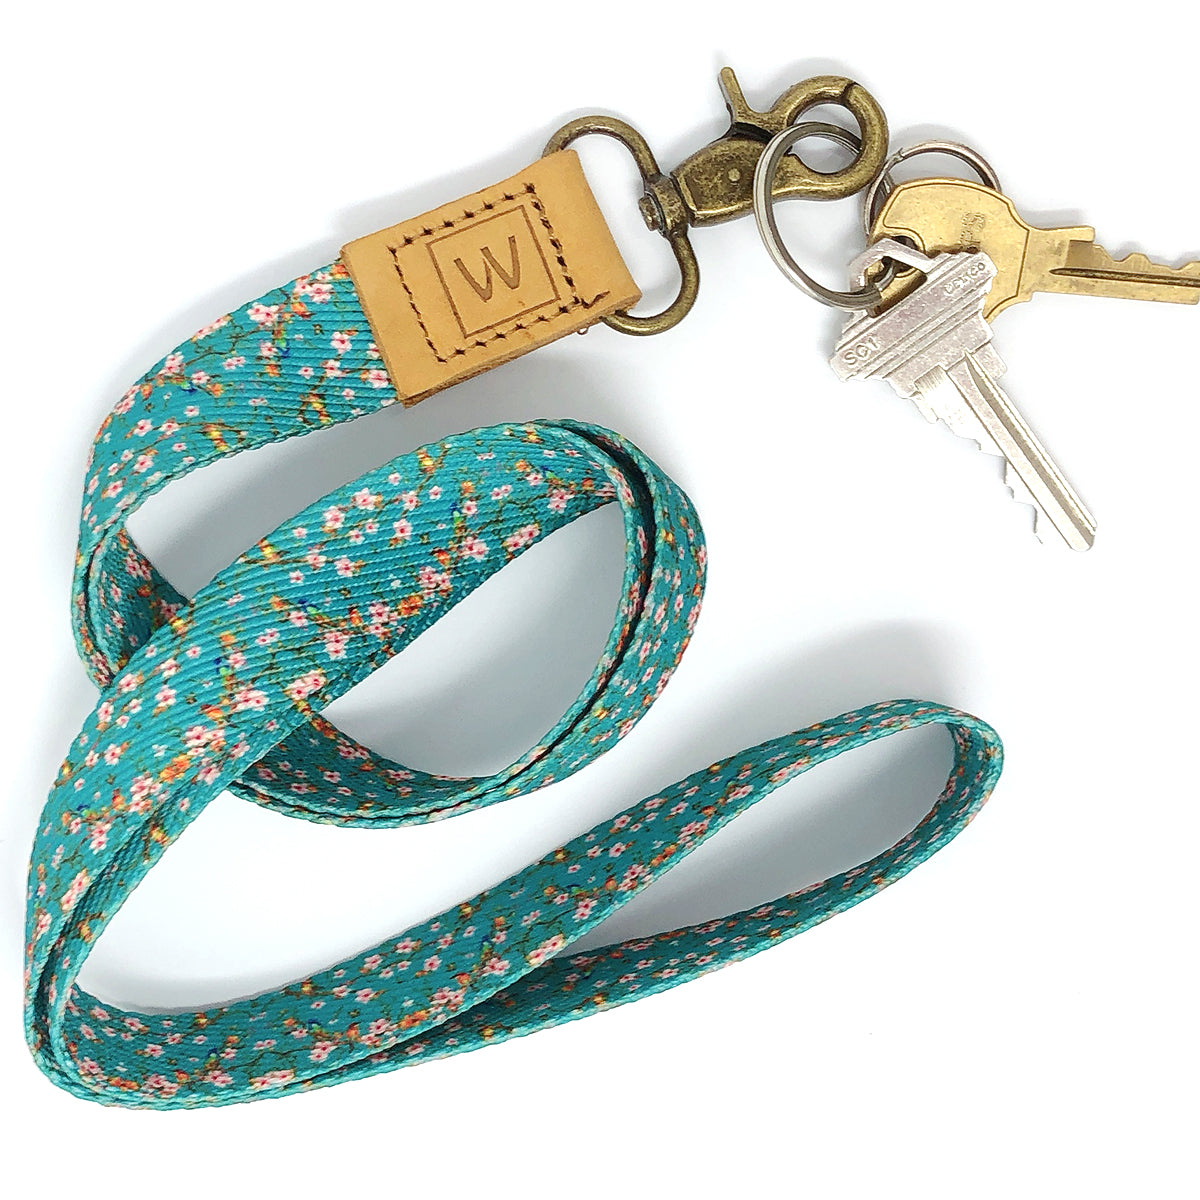 Wrapables Lanyard Keychain and ID Badge Holder Galaxy Blue